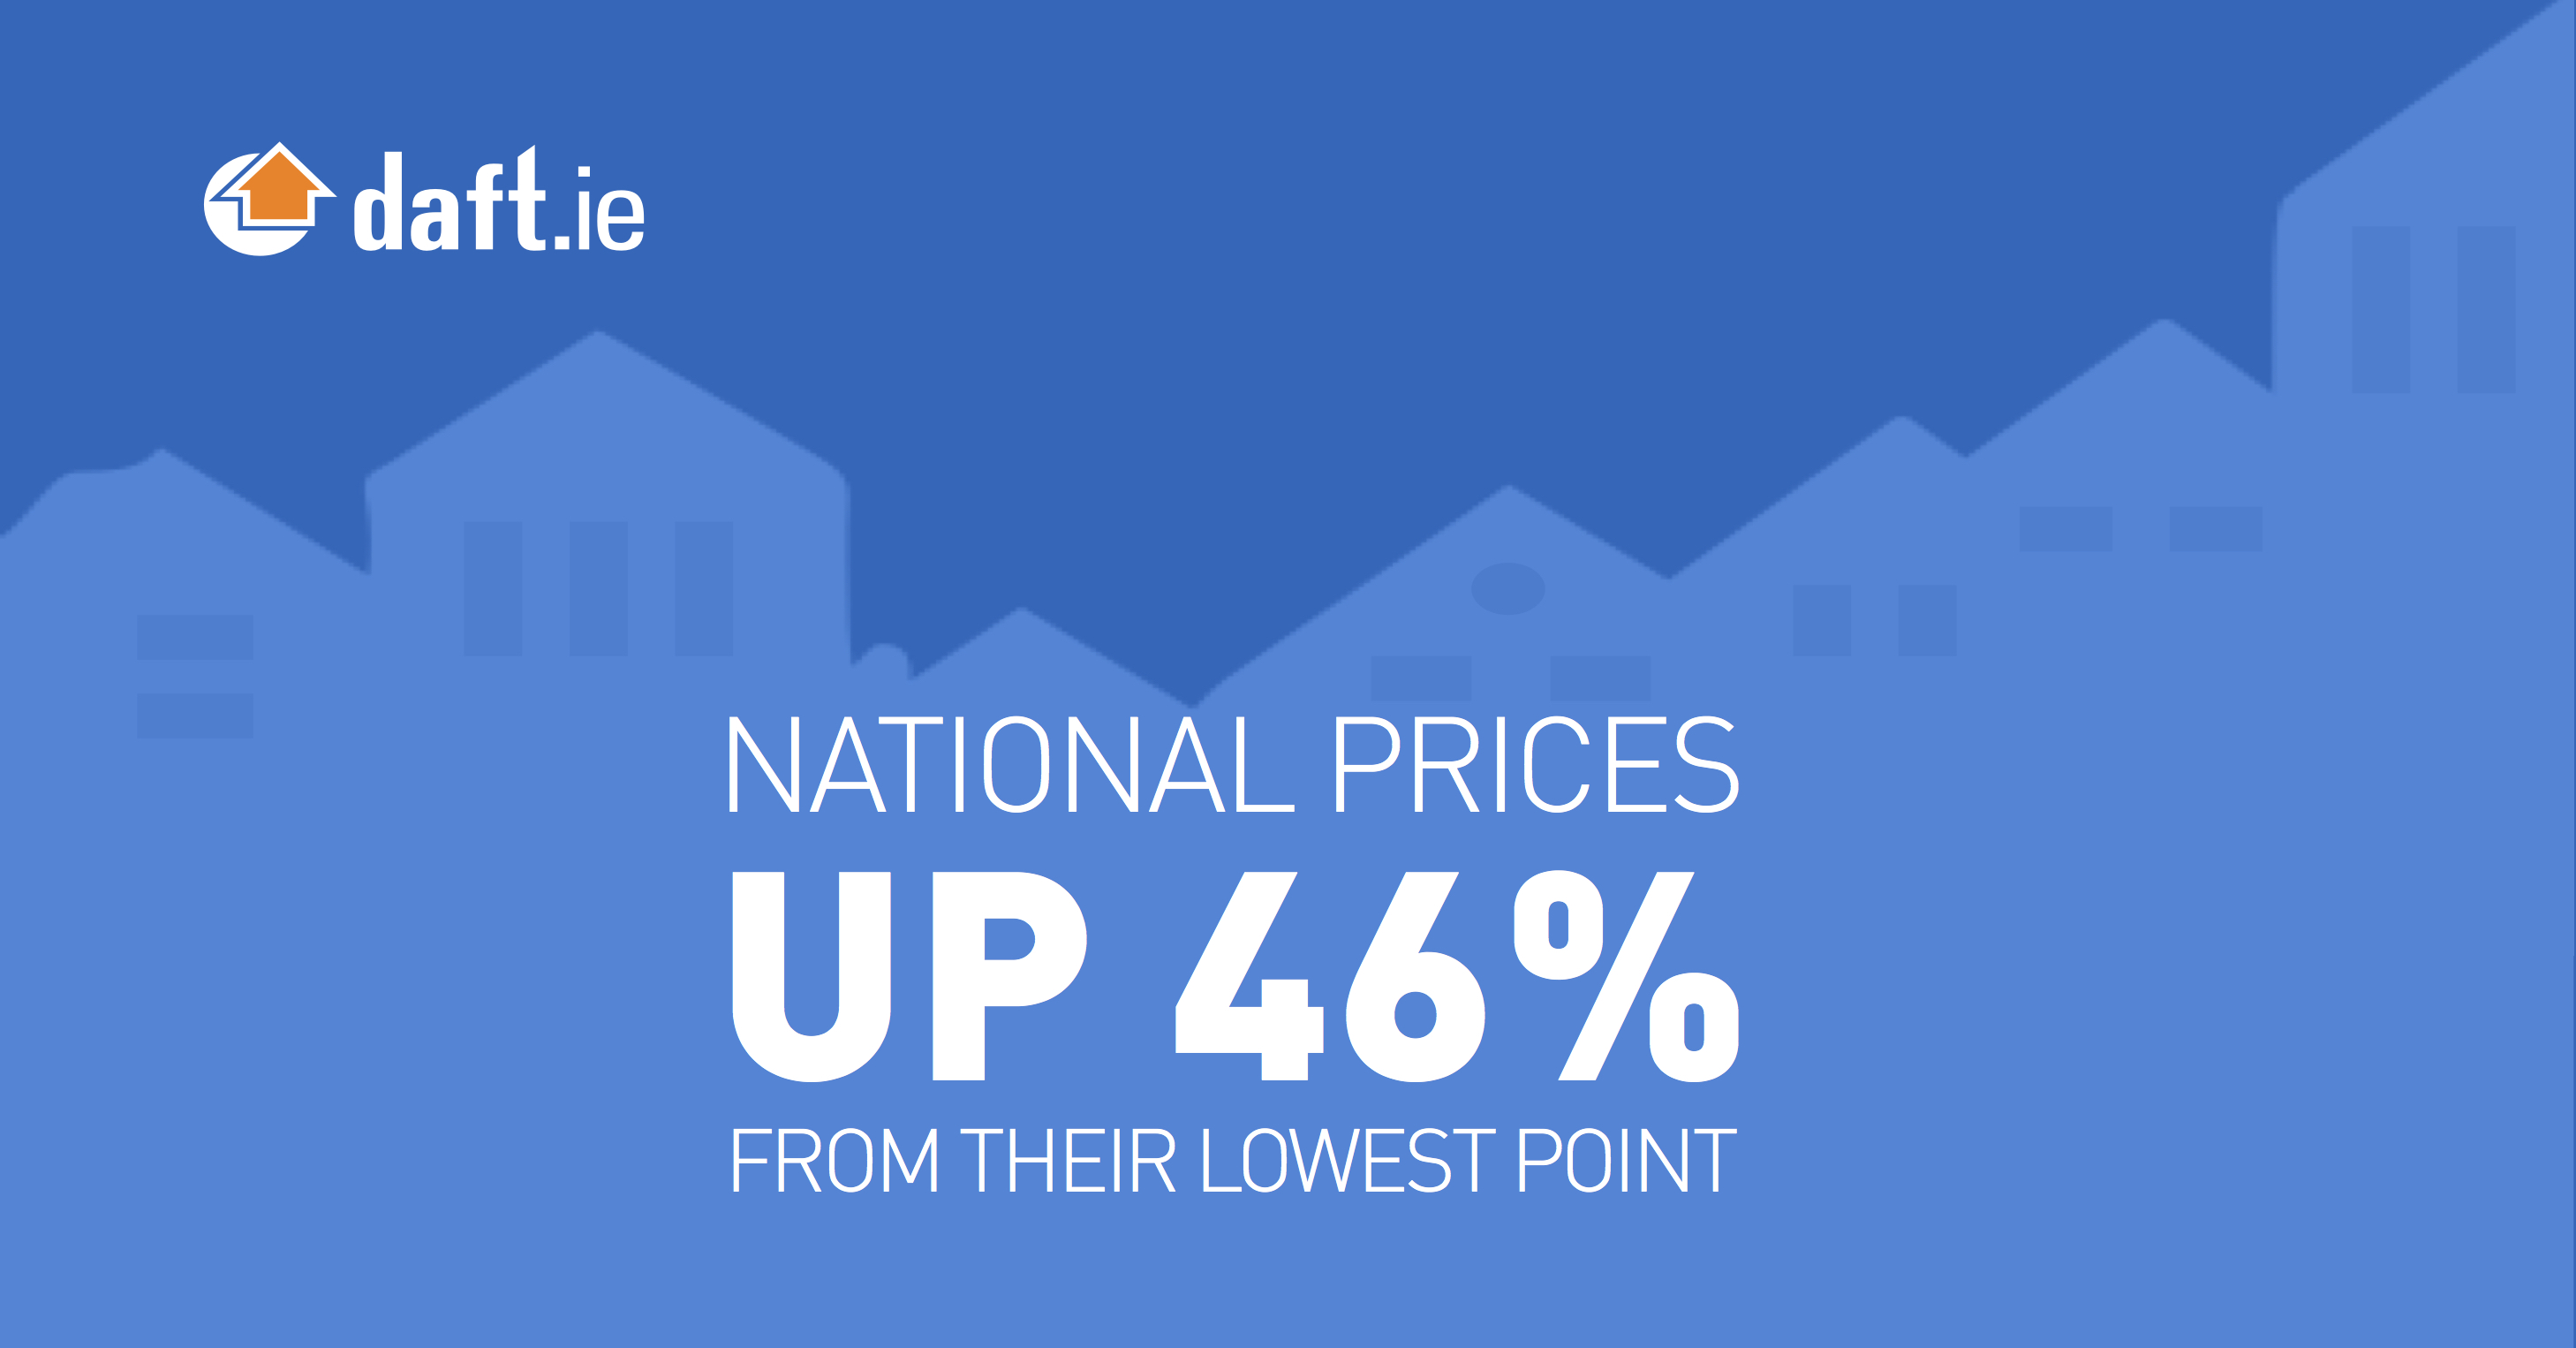 National prices up 46% from their lowest point